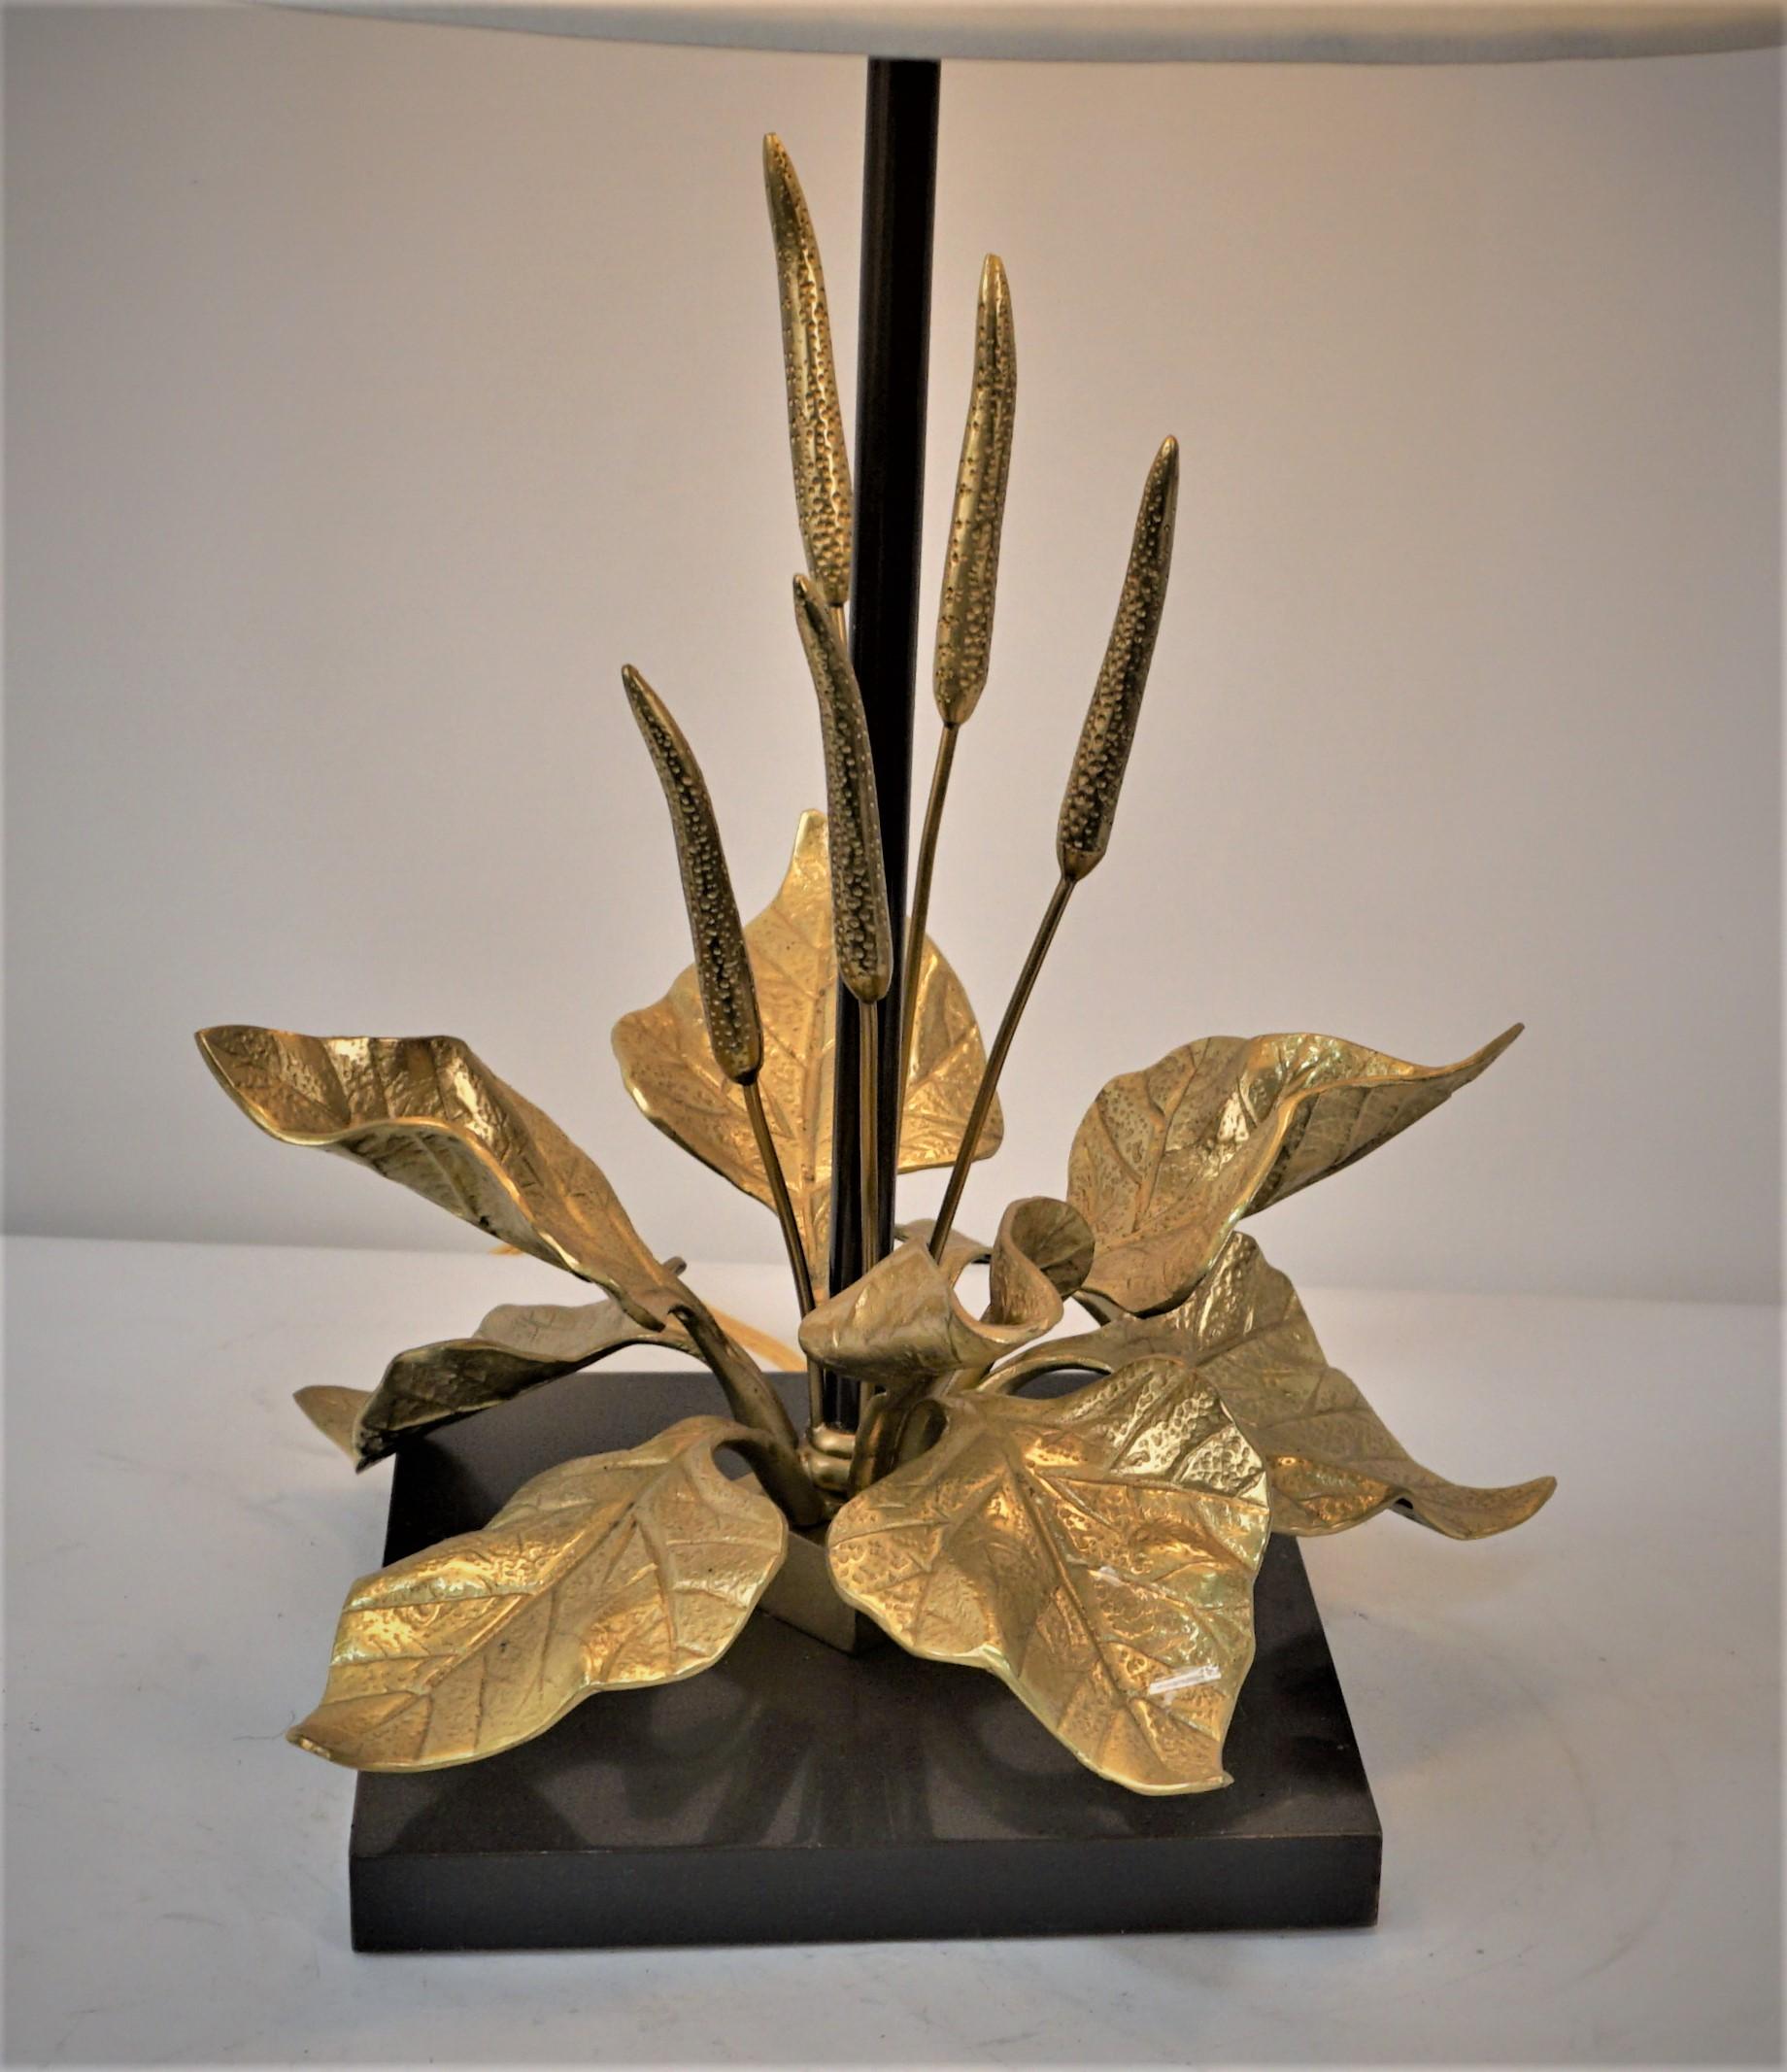 Bronze table lamp, in the style of Maison Charles, is made of bronze wheat and leaves on a black base. 
Professionally rewired with two pull chain sockets and fitted with silk hardback lampshade. 
Measurment includes the lampshade.